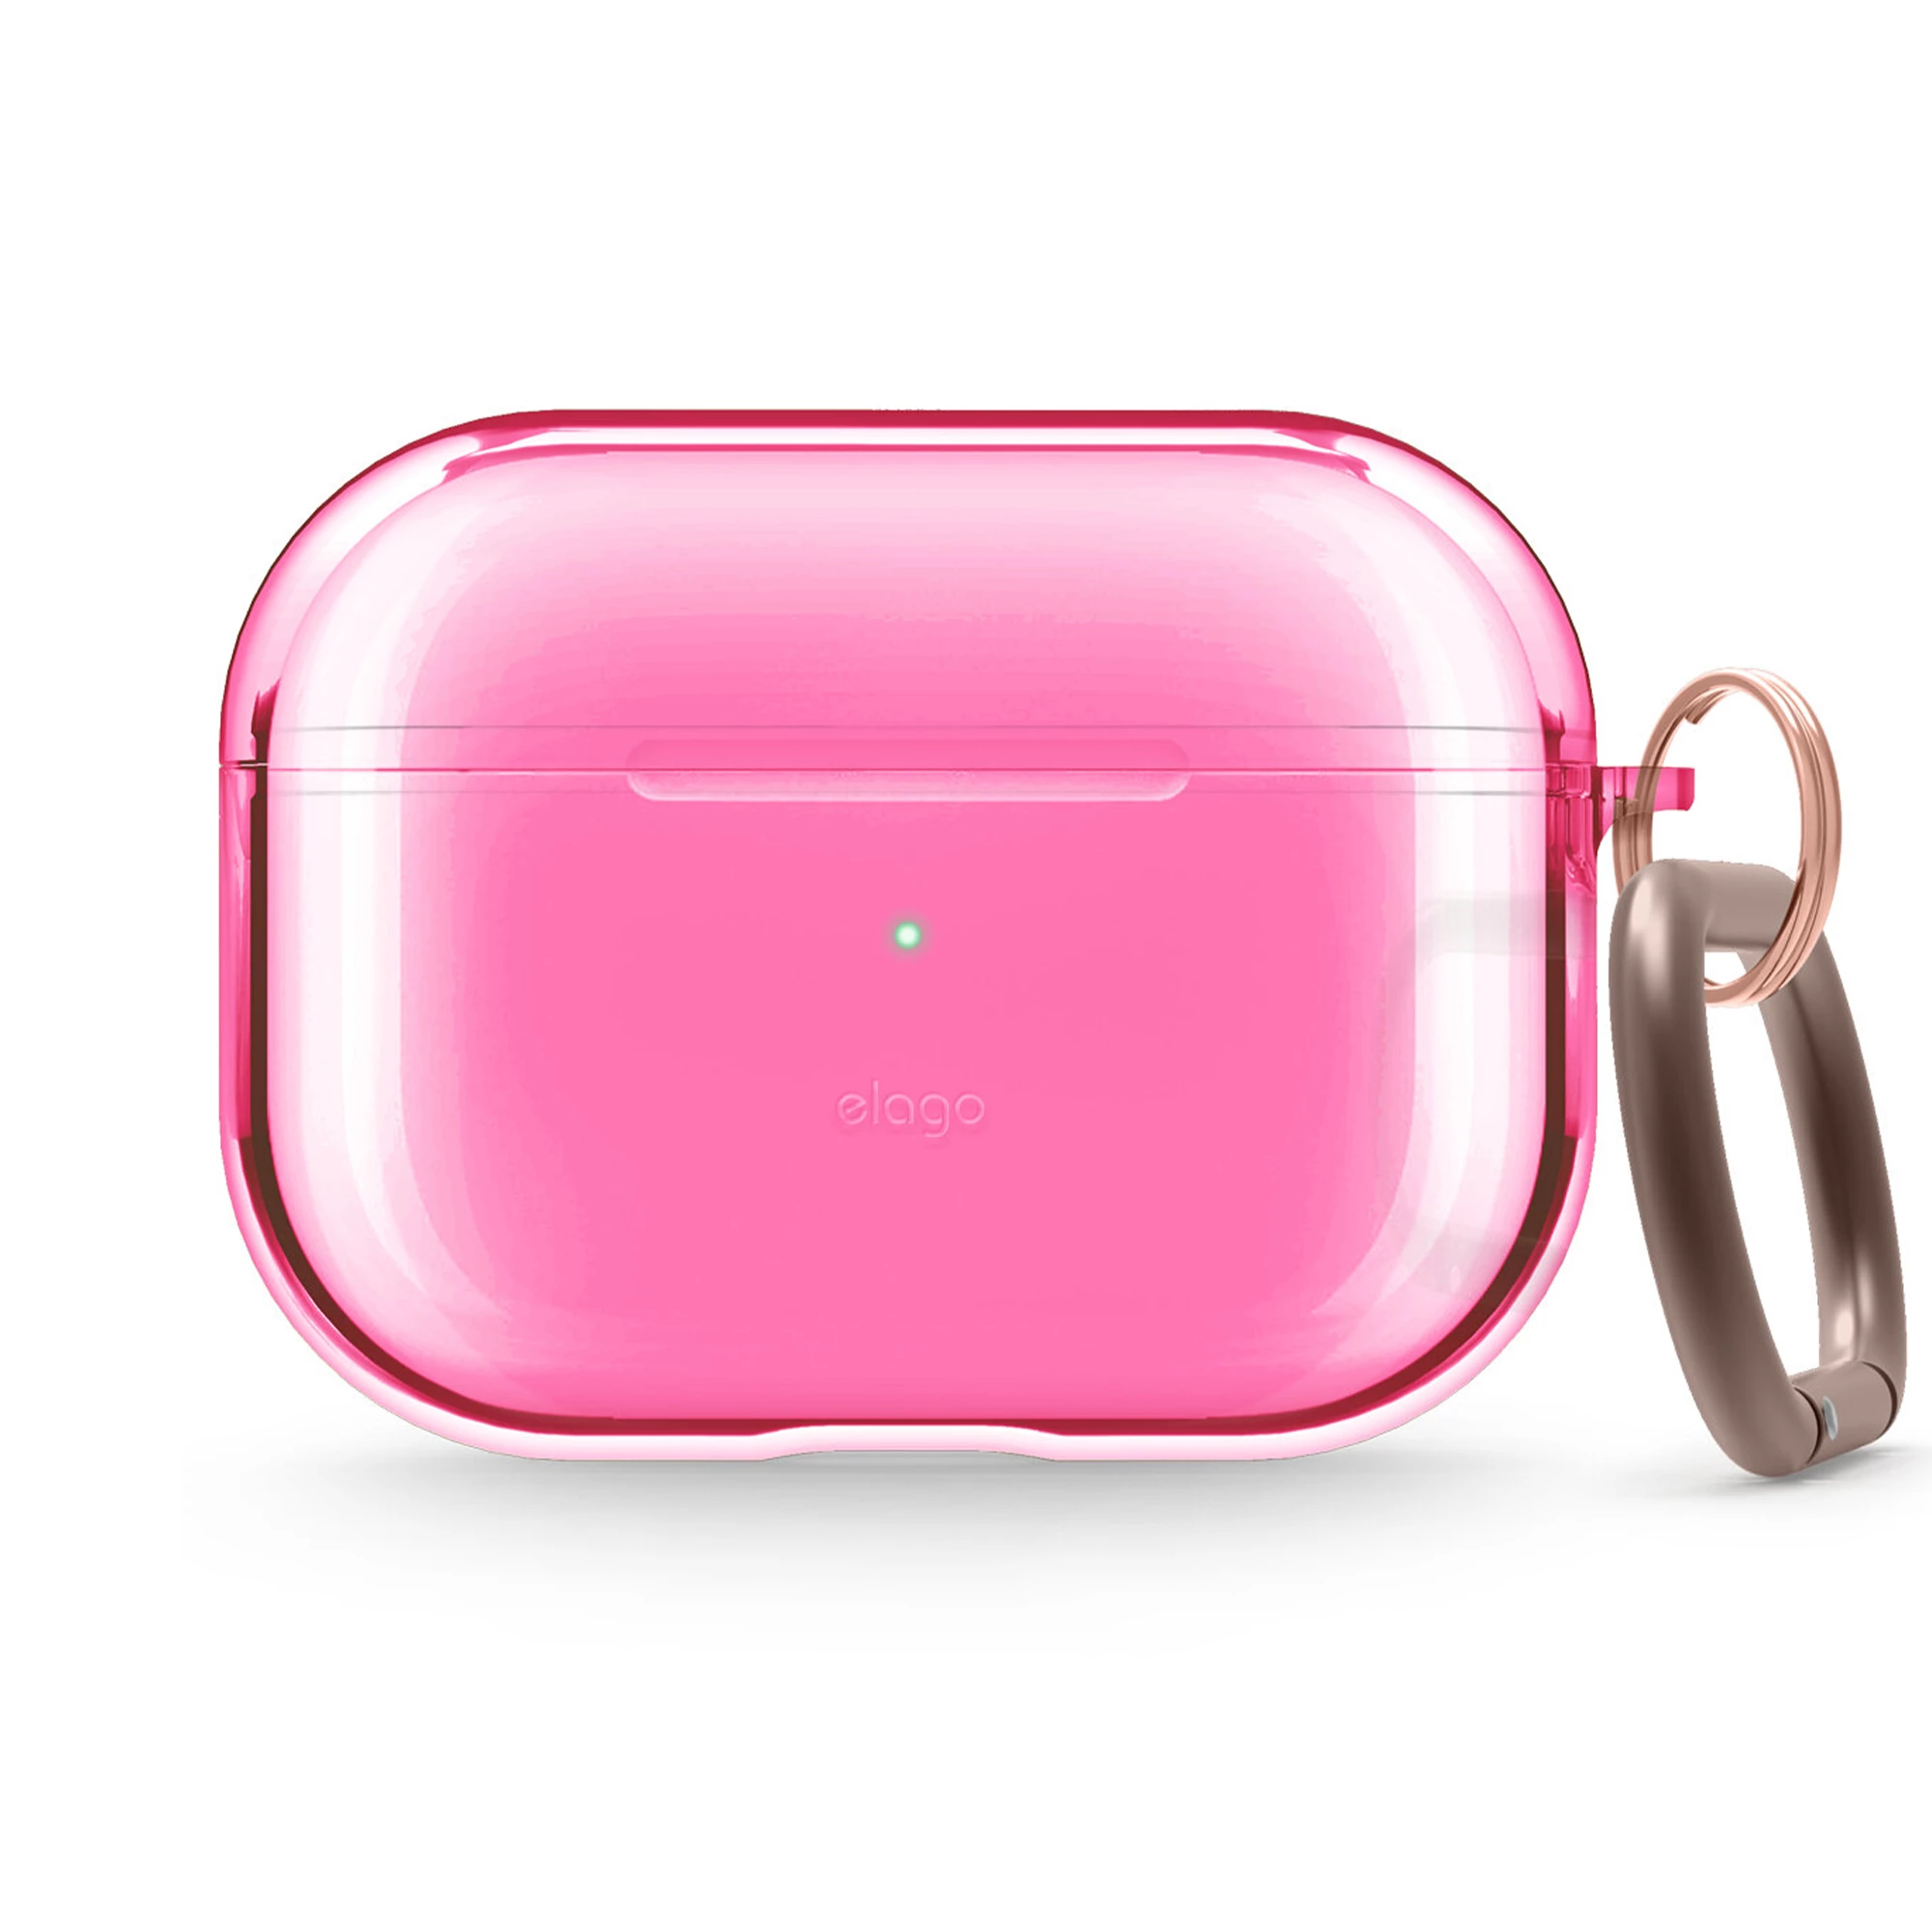 Elago Clear Case for Airpods Pro - Neon Hot Pink (EAPPCL-HANG-NHPK)